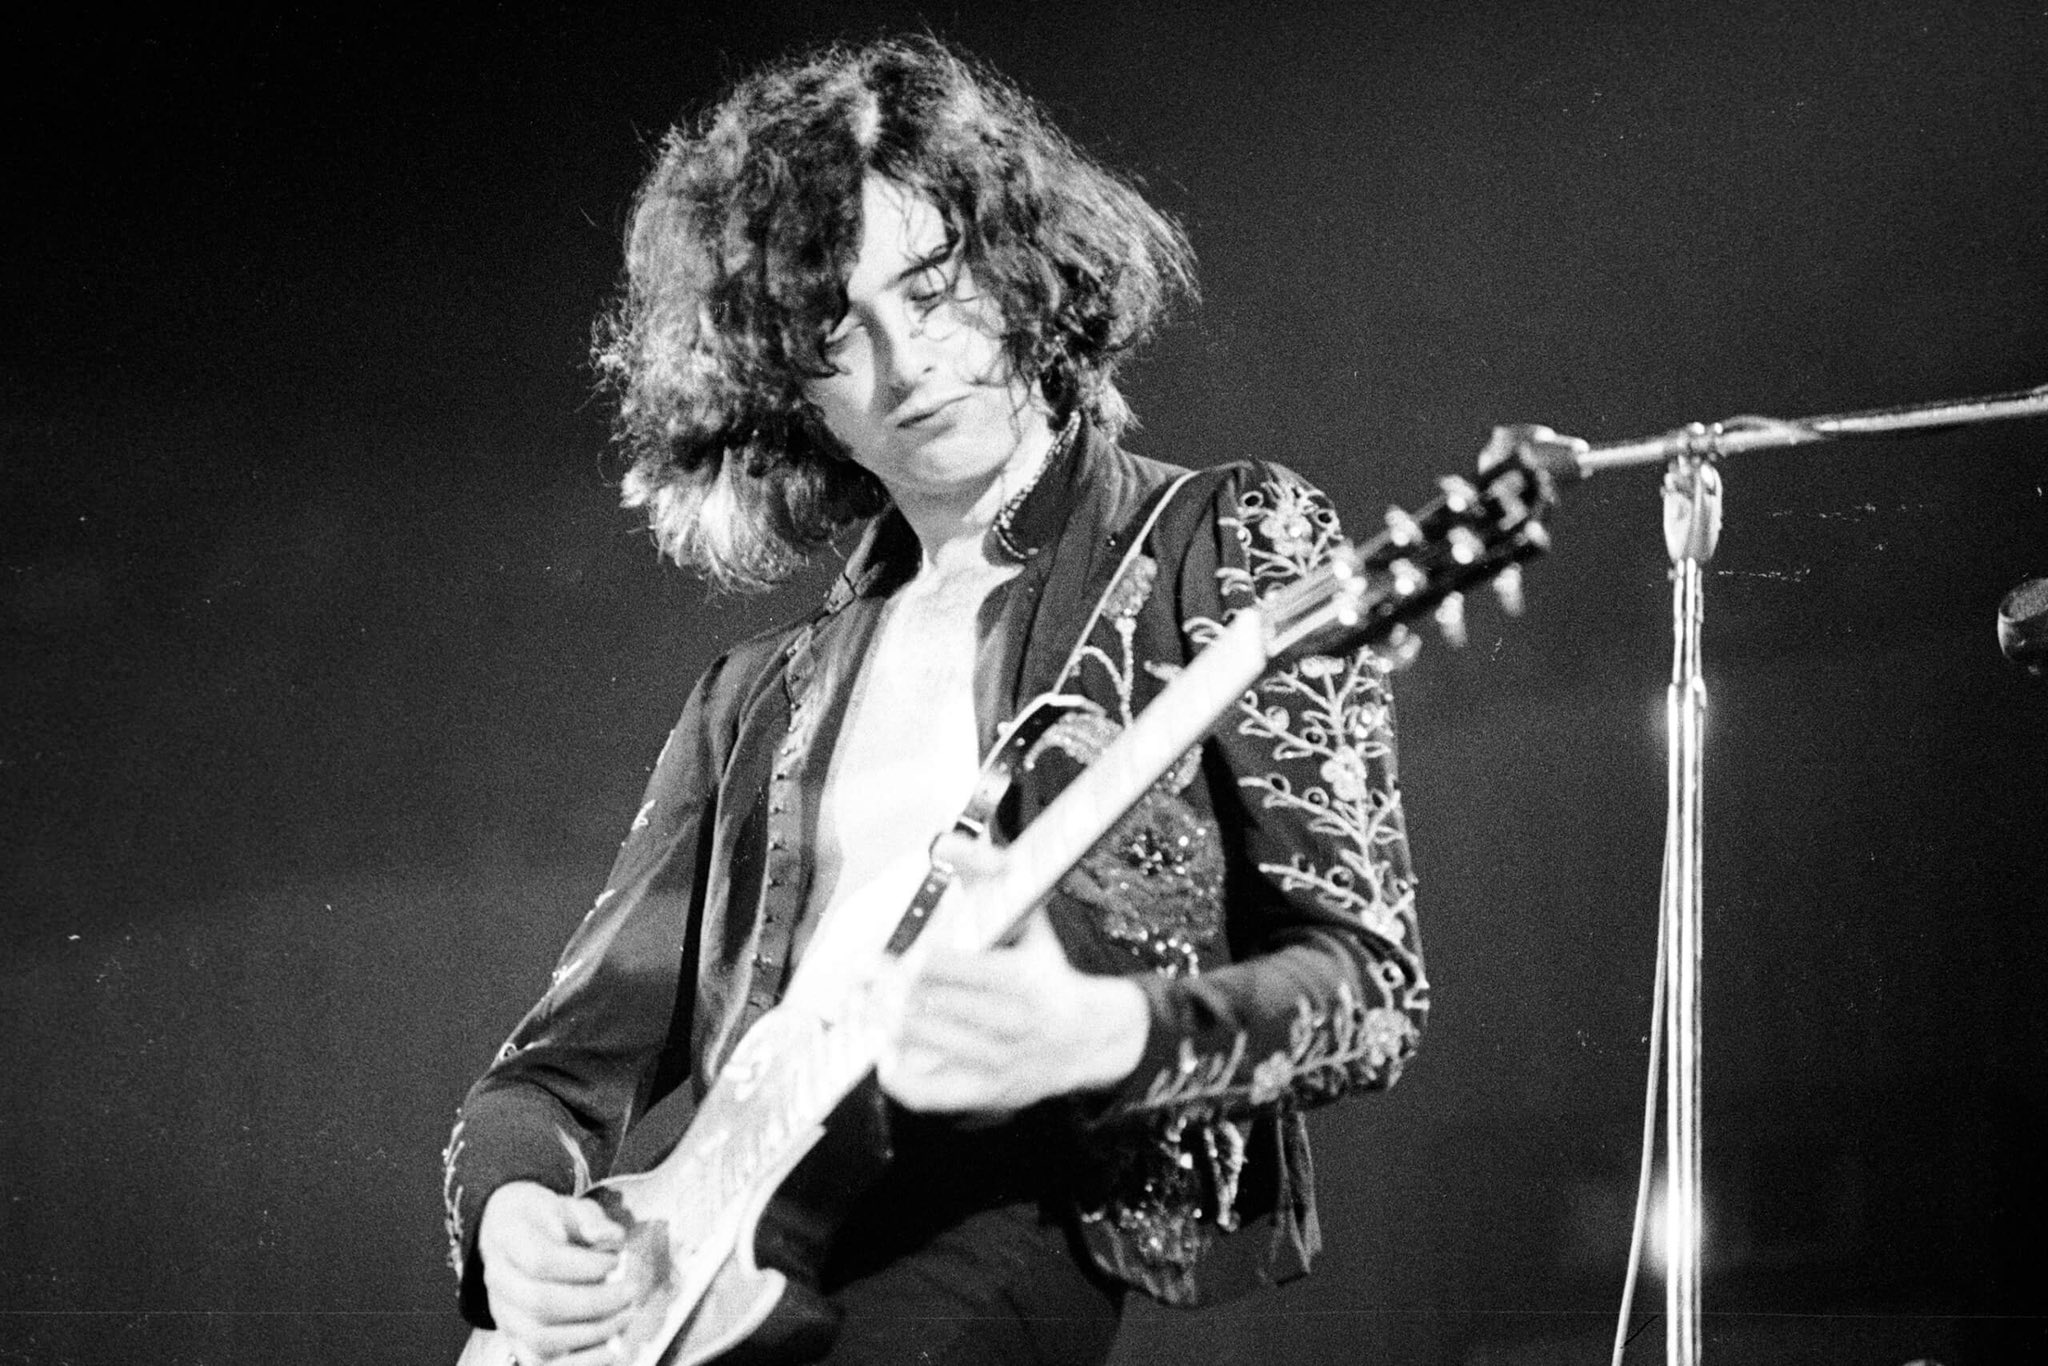 Happy birthday to Jimmy Page! 